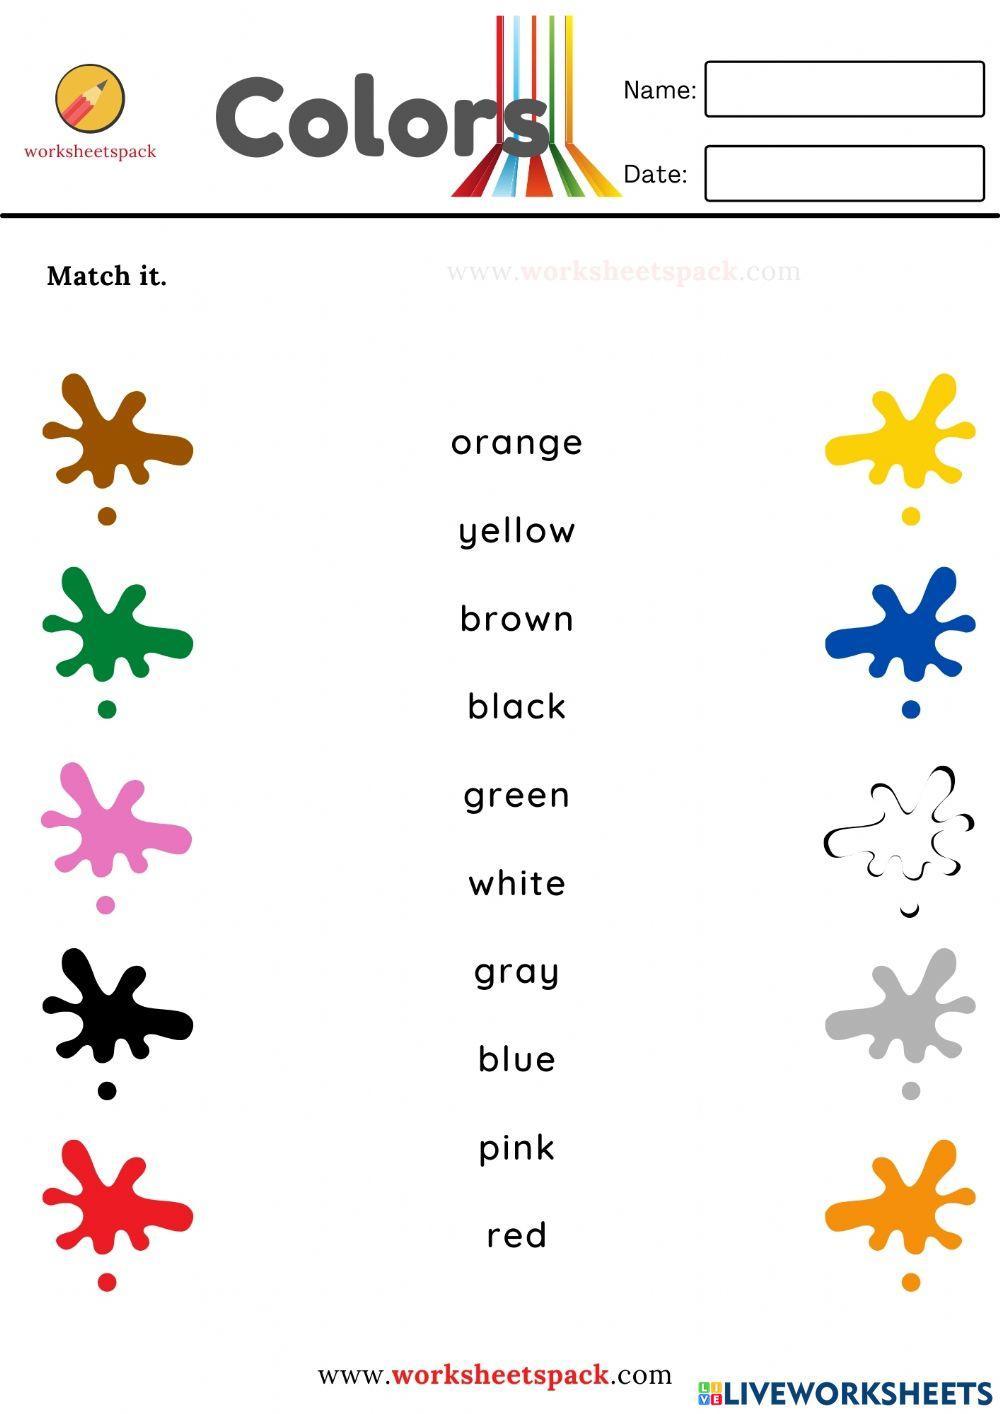 Colors matching worksheets